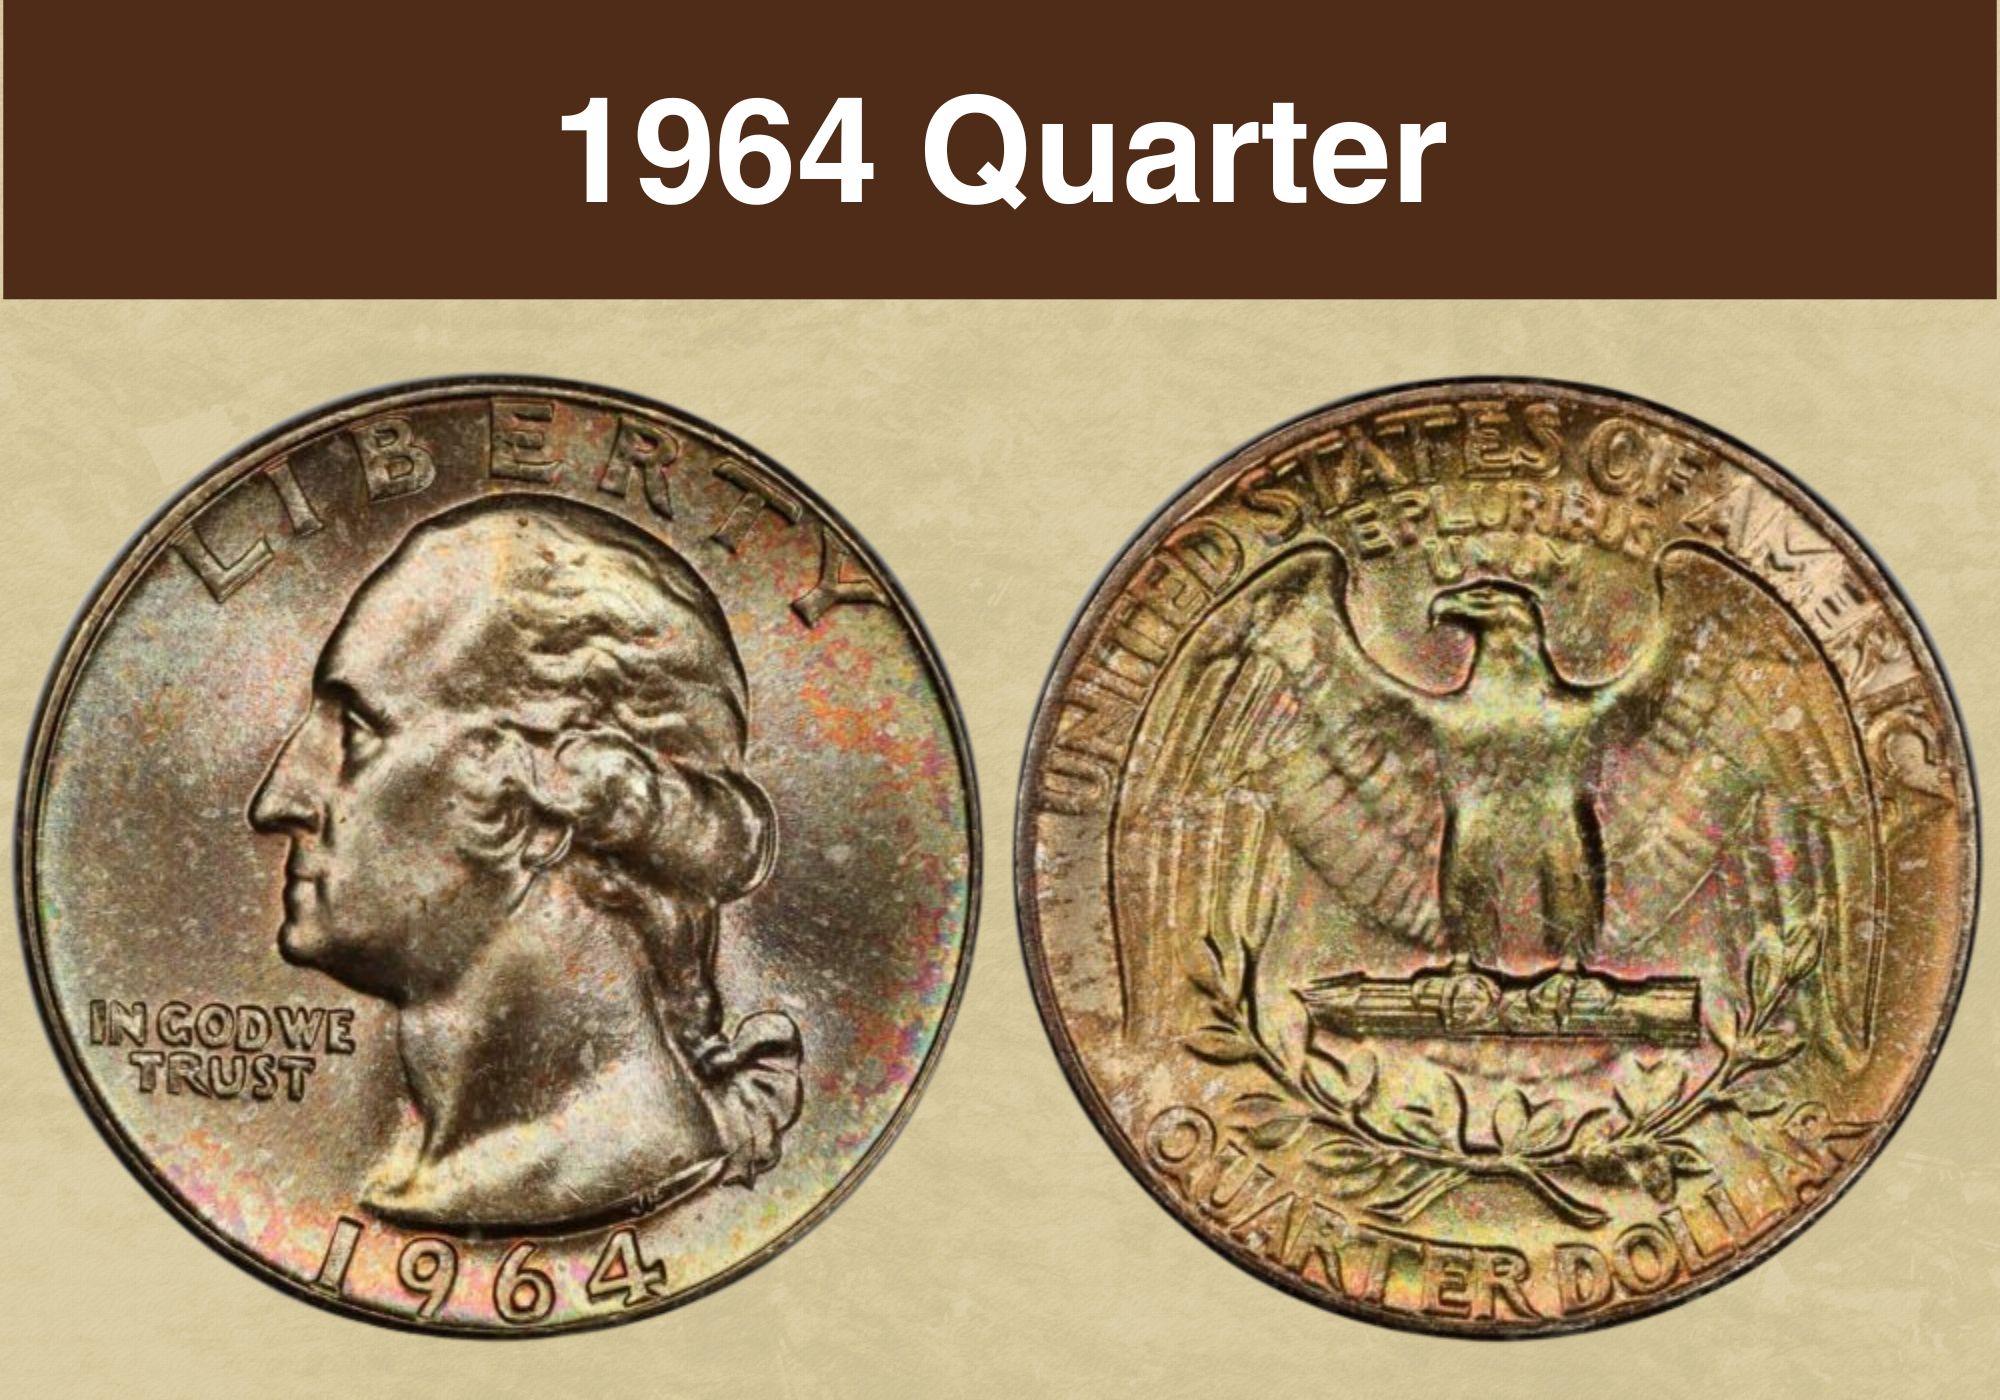 1788 Quarter Coin Value Lookup: How Much is it Worth? : The